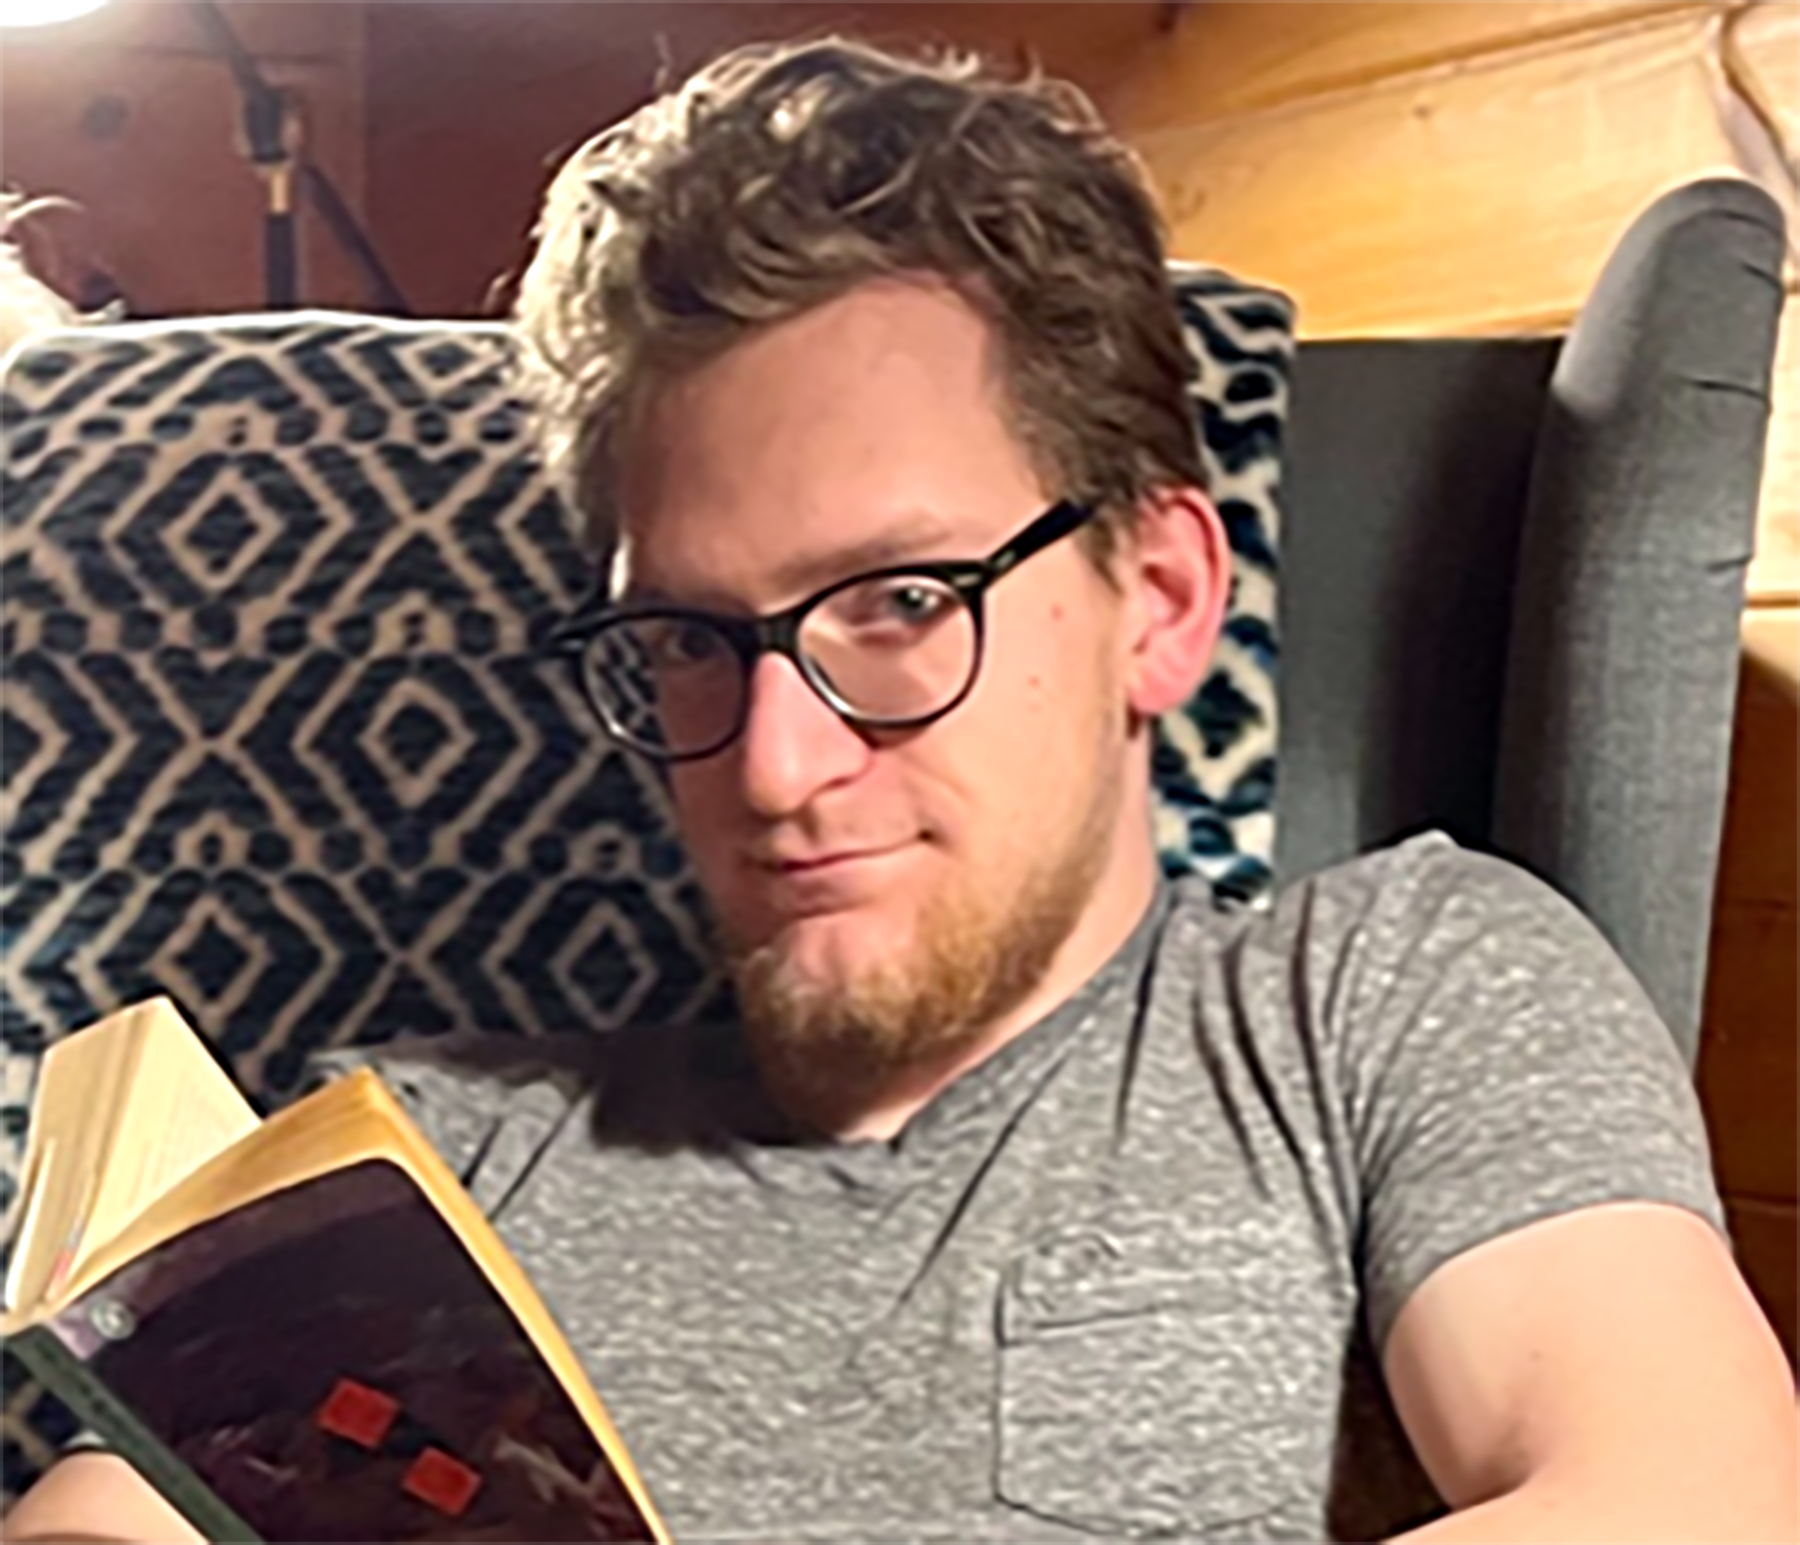 Ben looking at the camera while reading a book in a wingback chair.